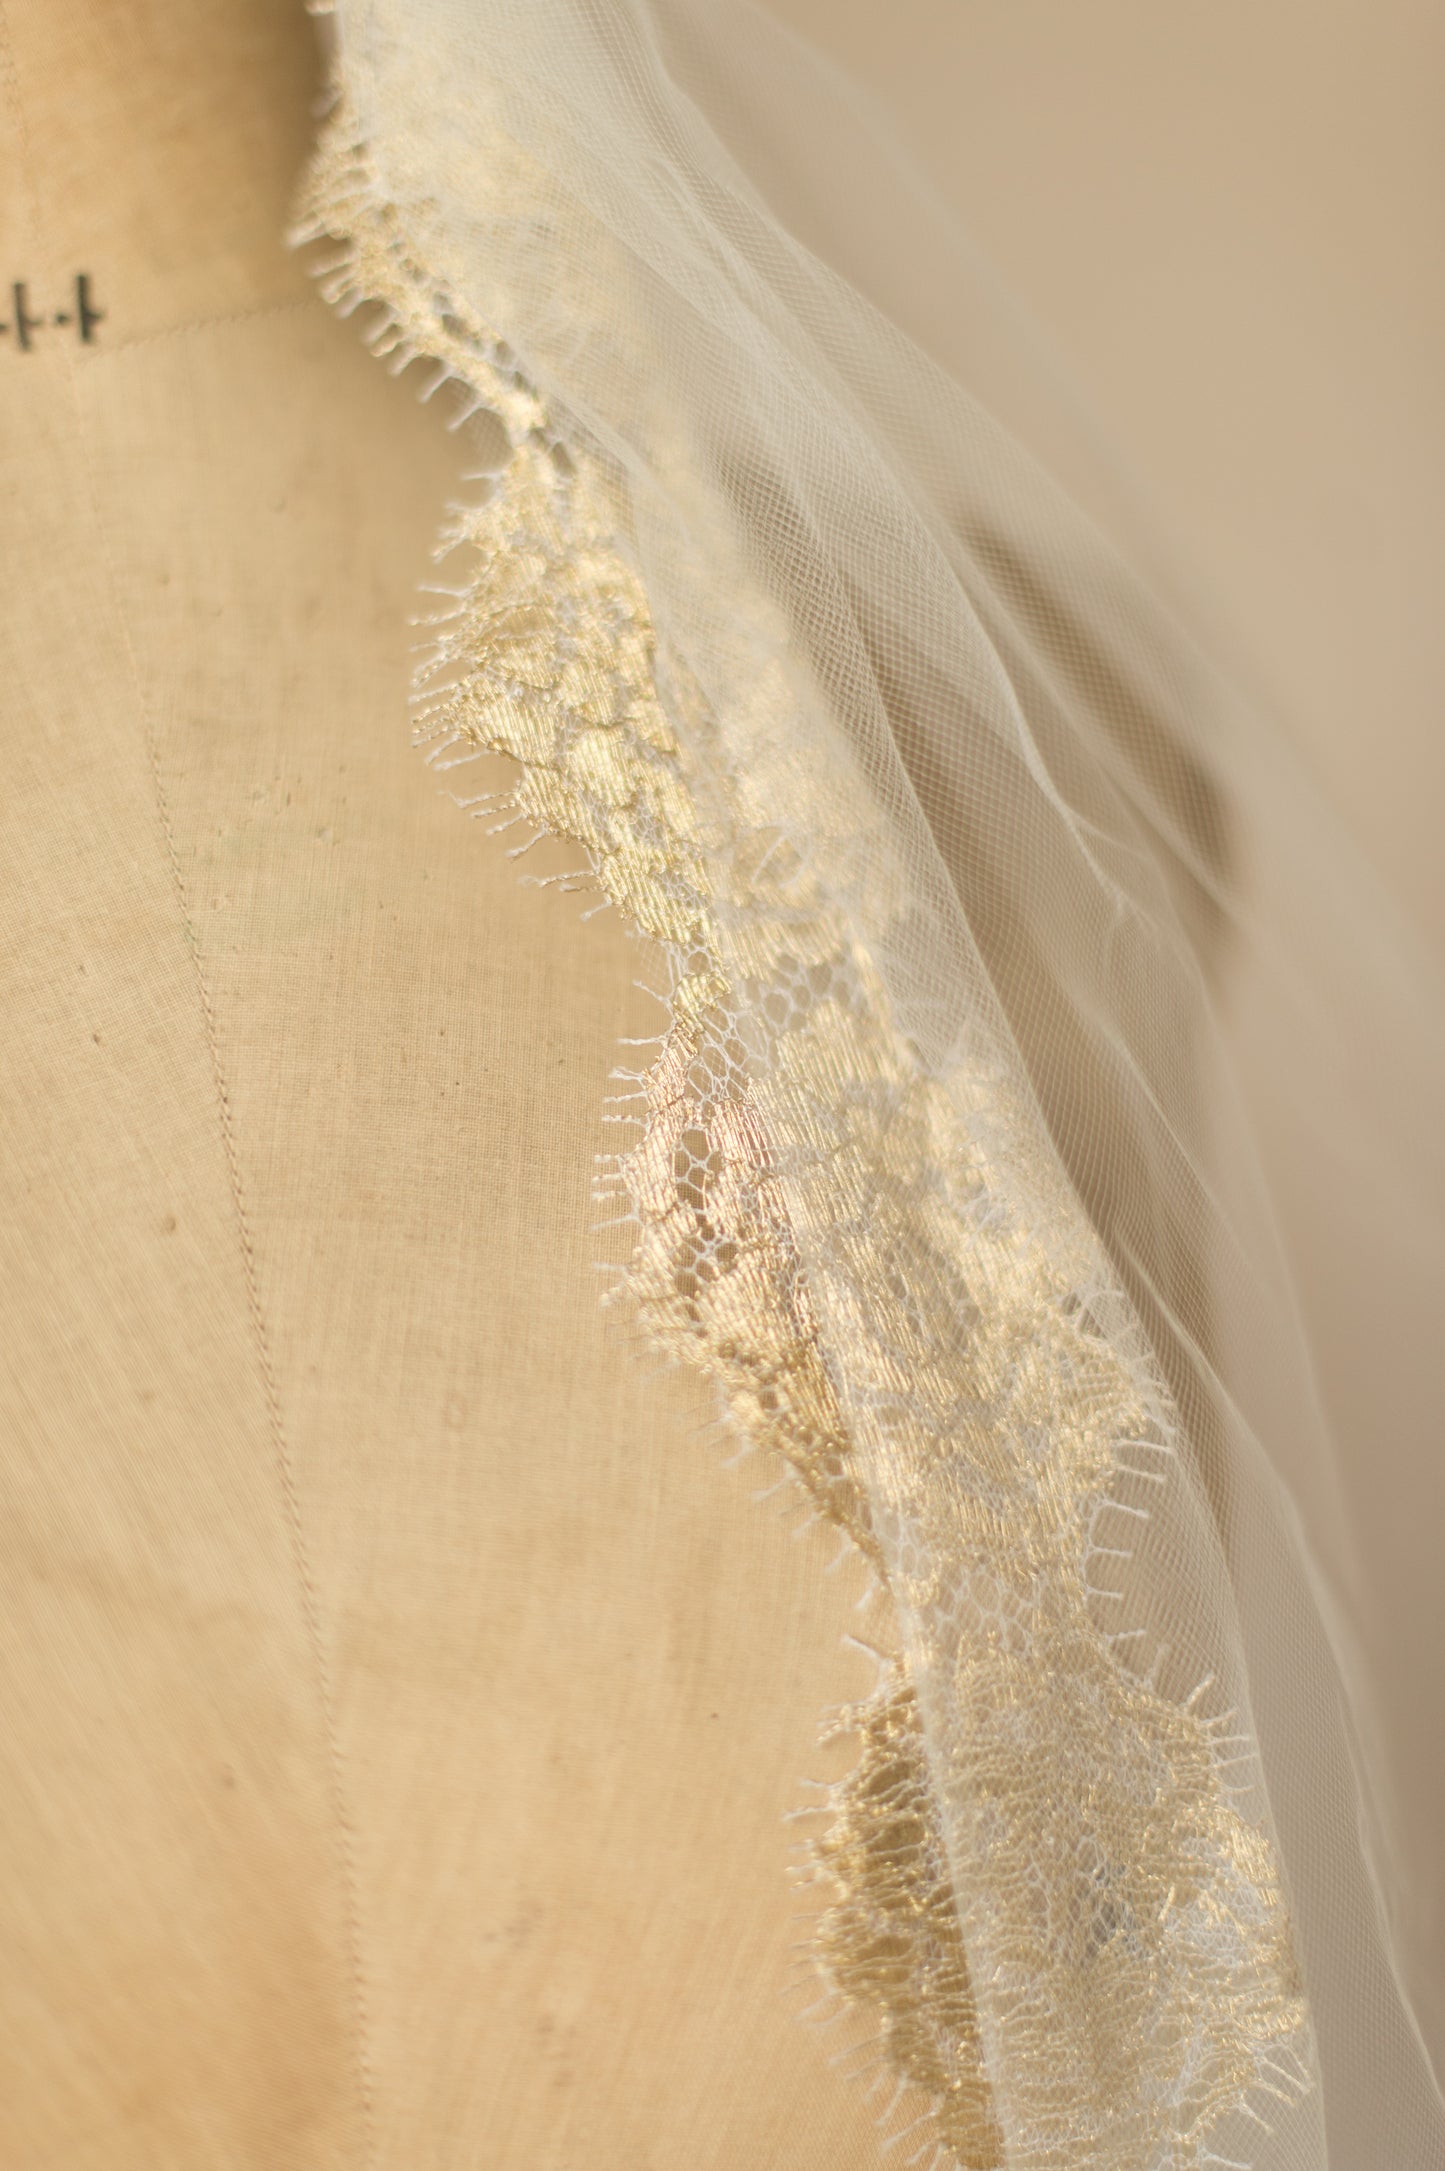 Gold Lace Veil Mantilla Wedding Veil French Chantilly Lace Bridal Veil Eyelash Lace Trim Fingertip Boho Veil Cathedral Vintage Veil ISABELLA VEIL  for Her, for Bride, for Bridesmaid Gift , for Mother of the Bride, for Wedding Guest or Special Occasion by Camilla Christine Bridal Jewelry and Wedding Accessories. Bridal Style Inspiration Trends for Bride, Wedding Ideas